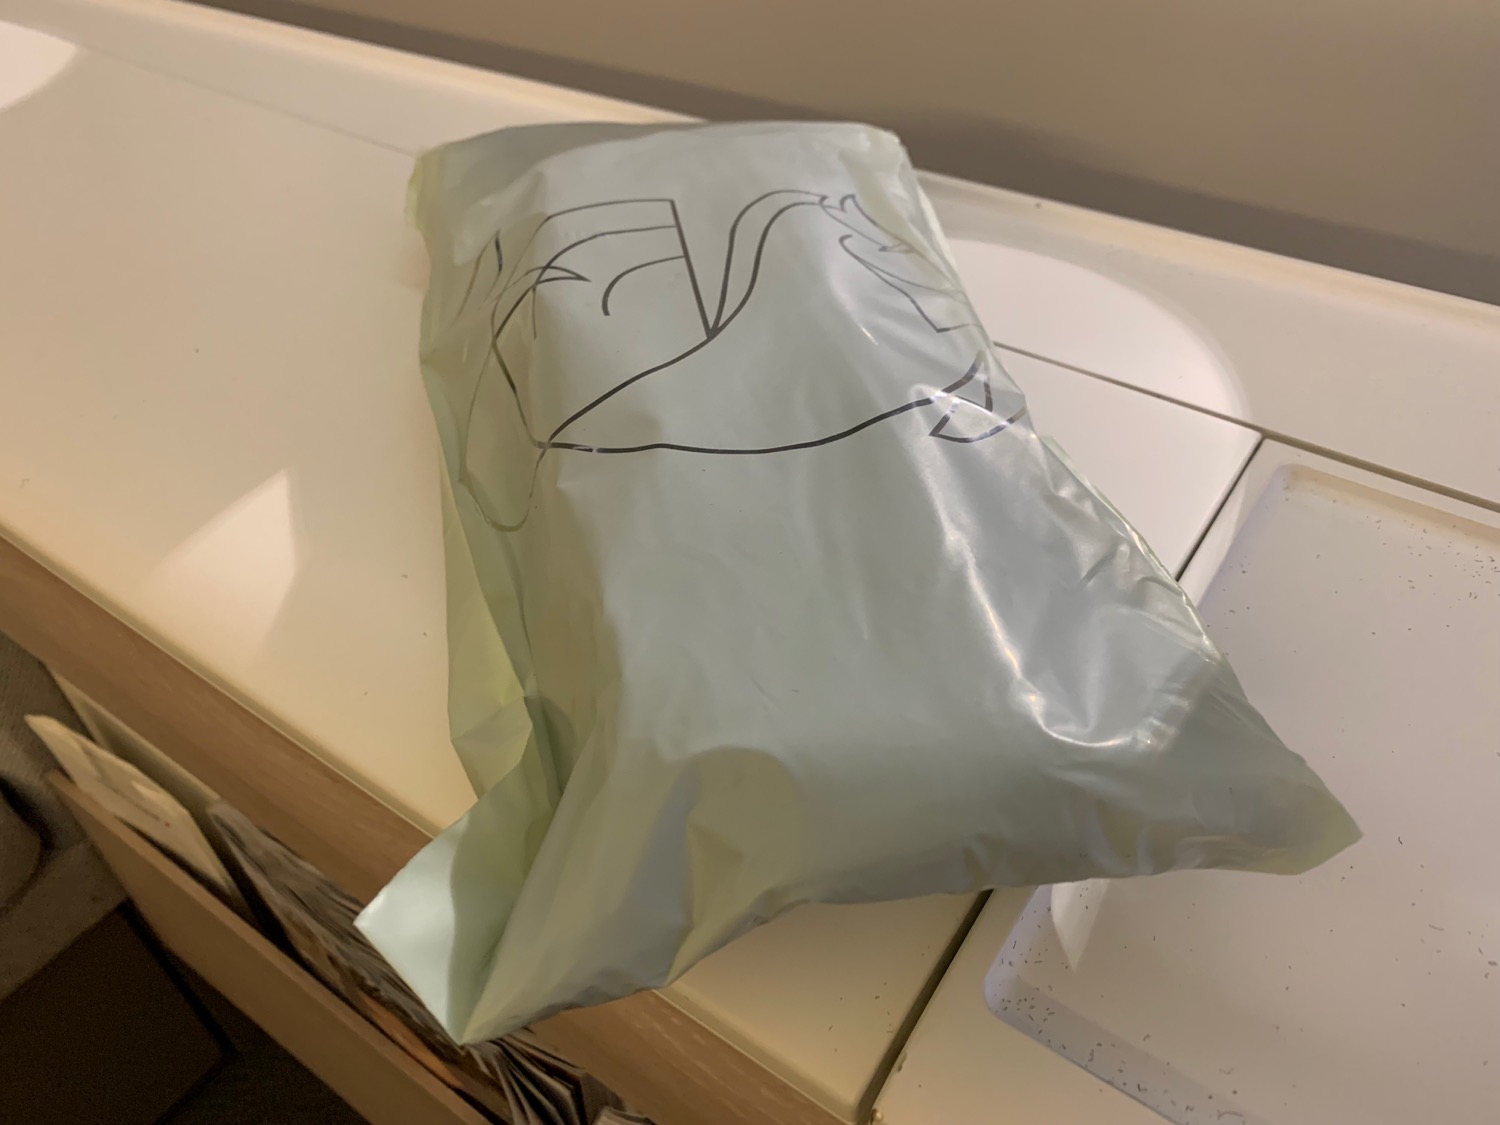 a plastic bag with a drawing on it